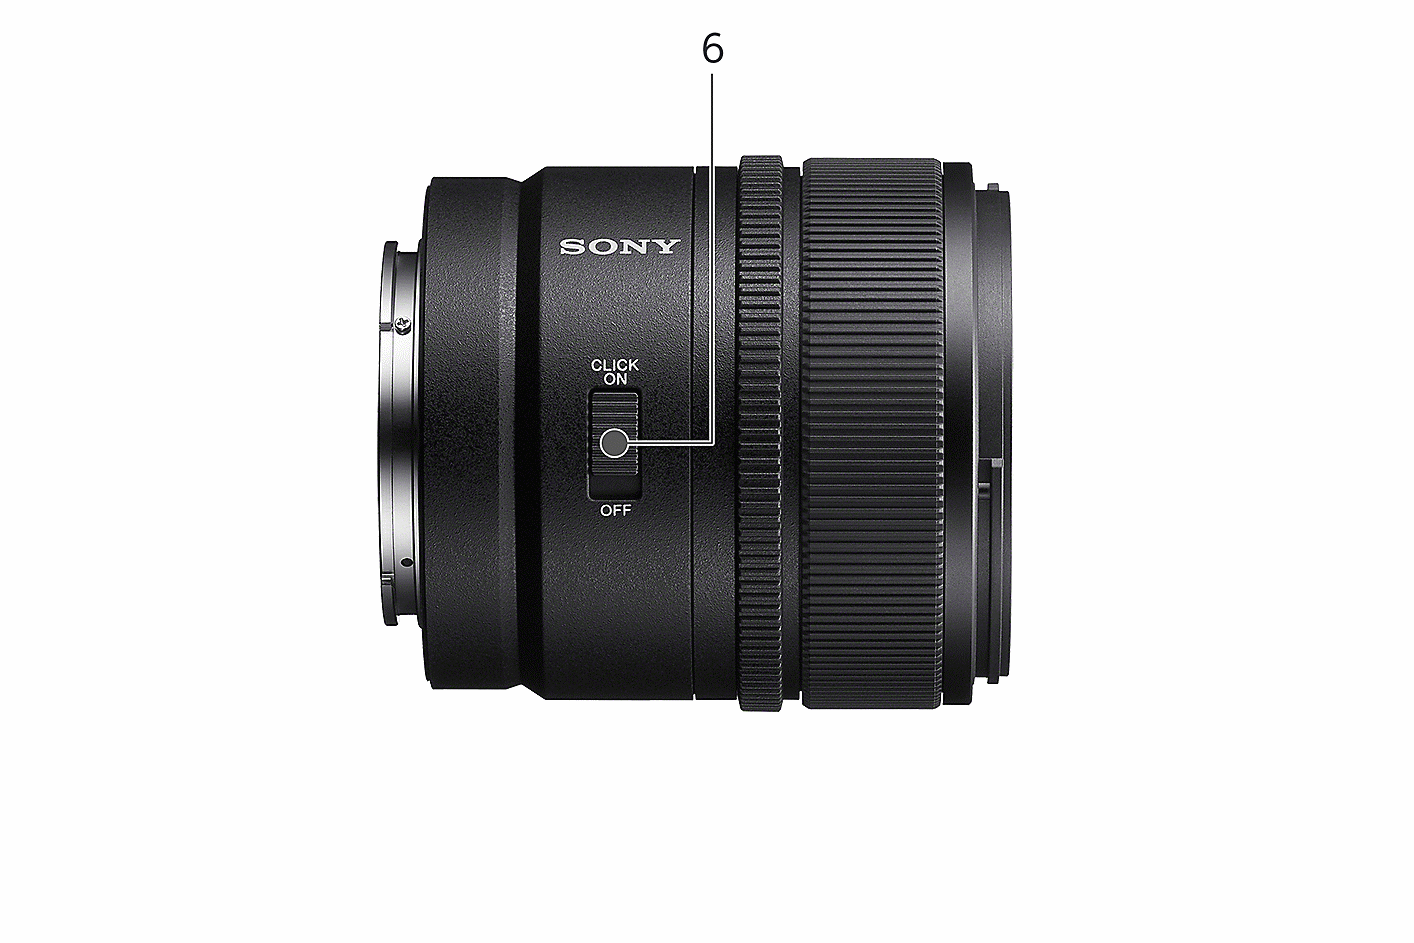 Product images of E 15-mm F1.4 G, right side